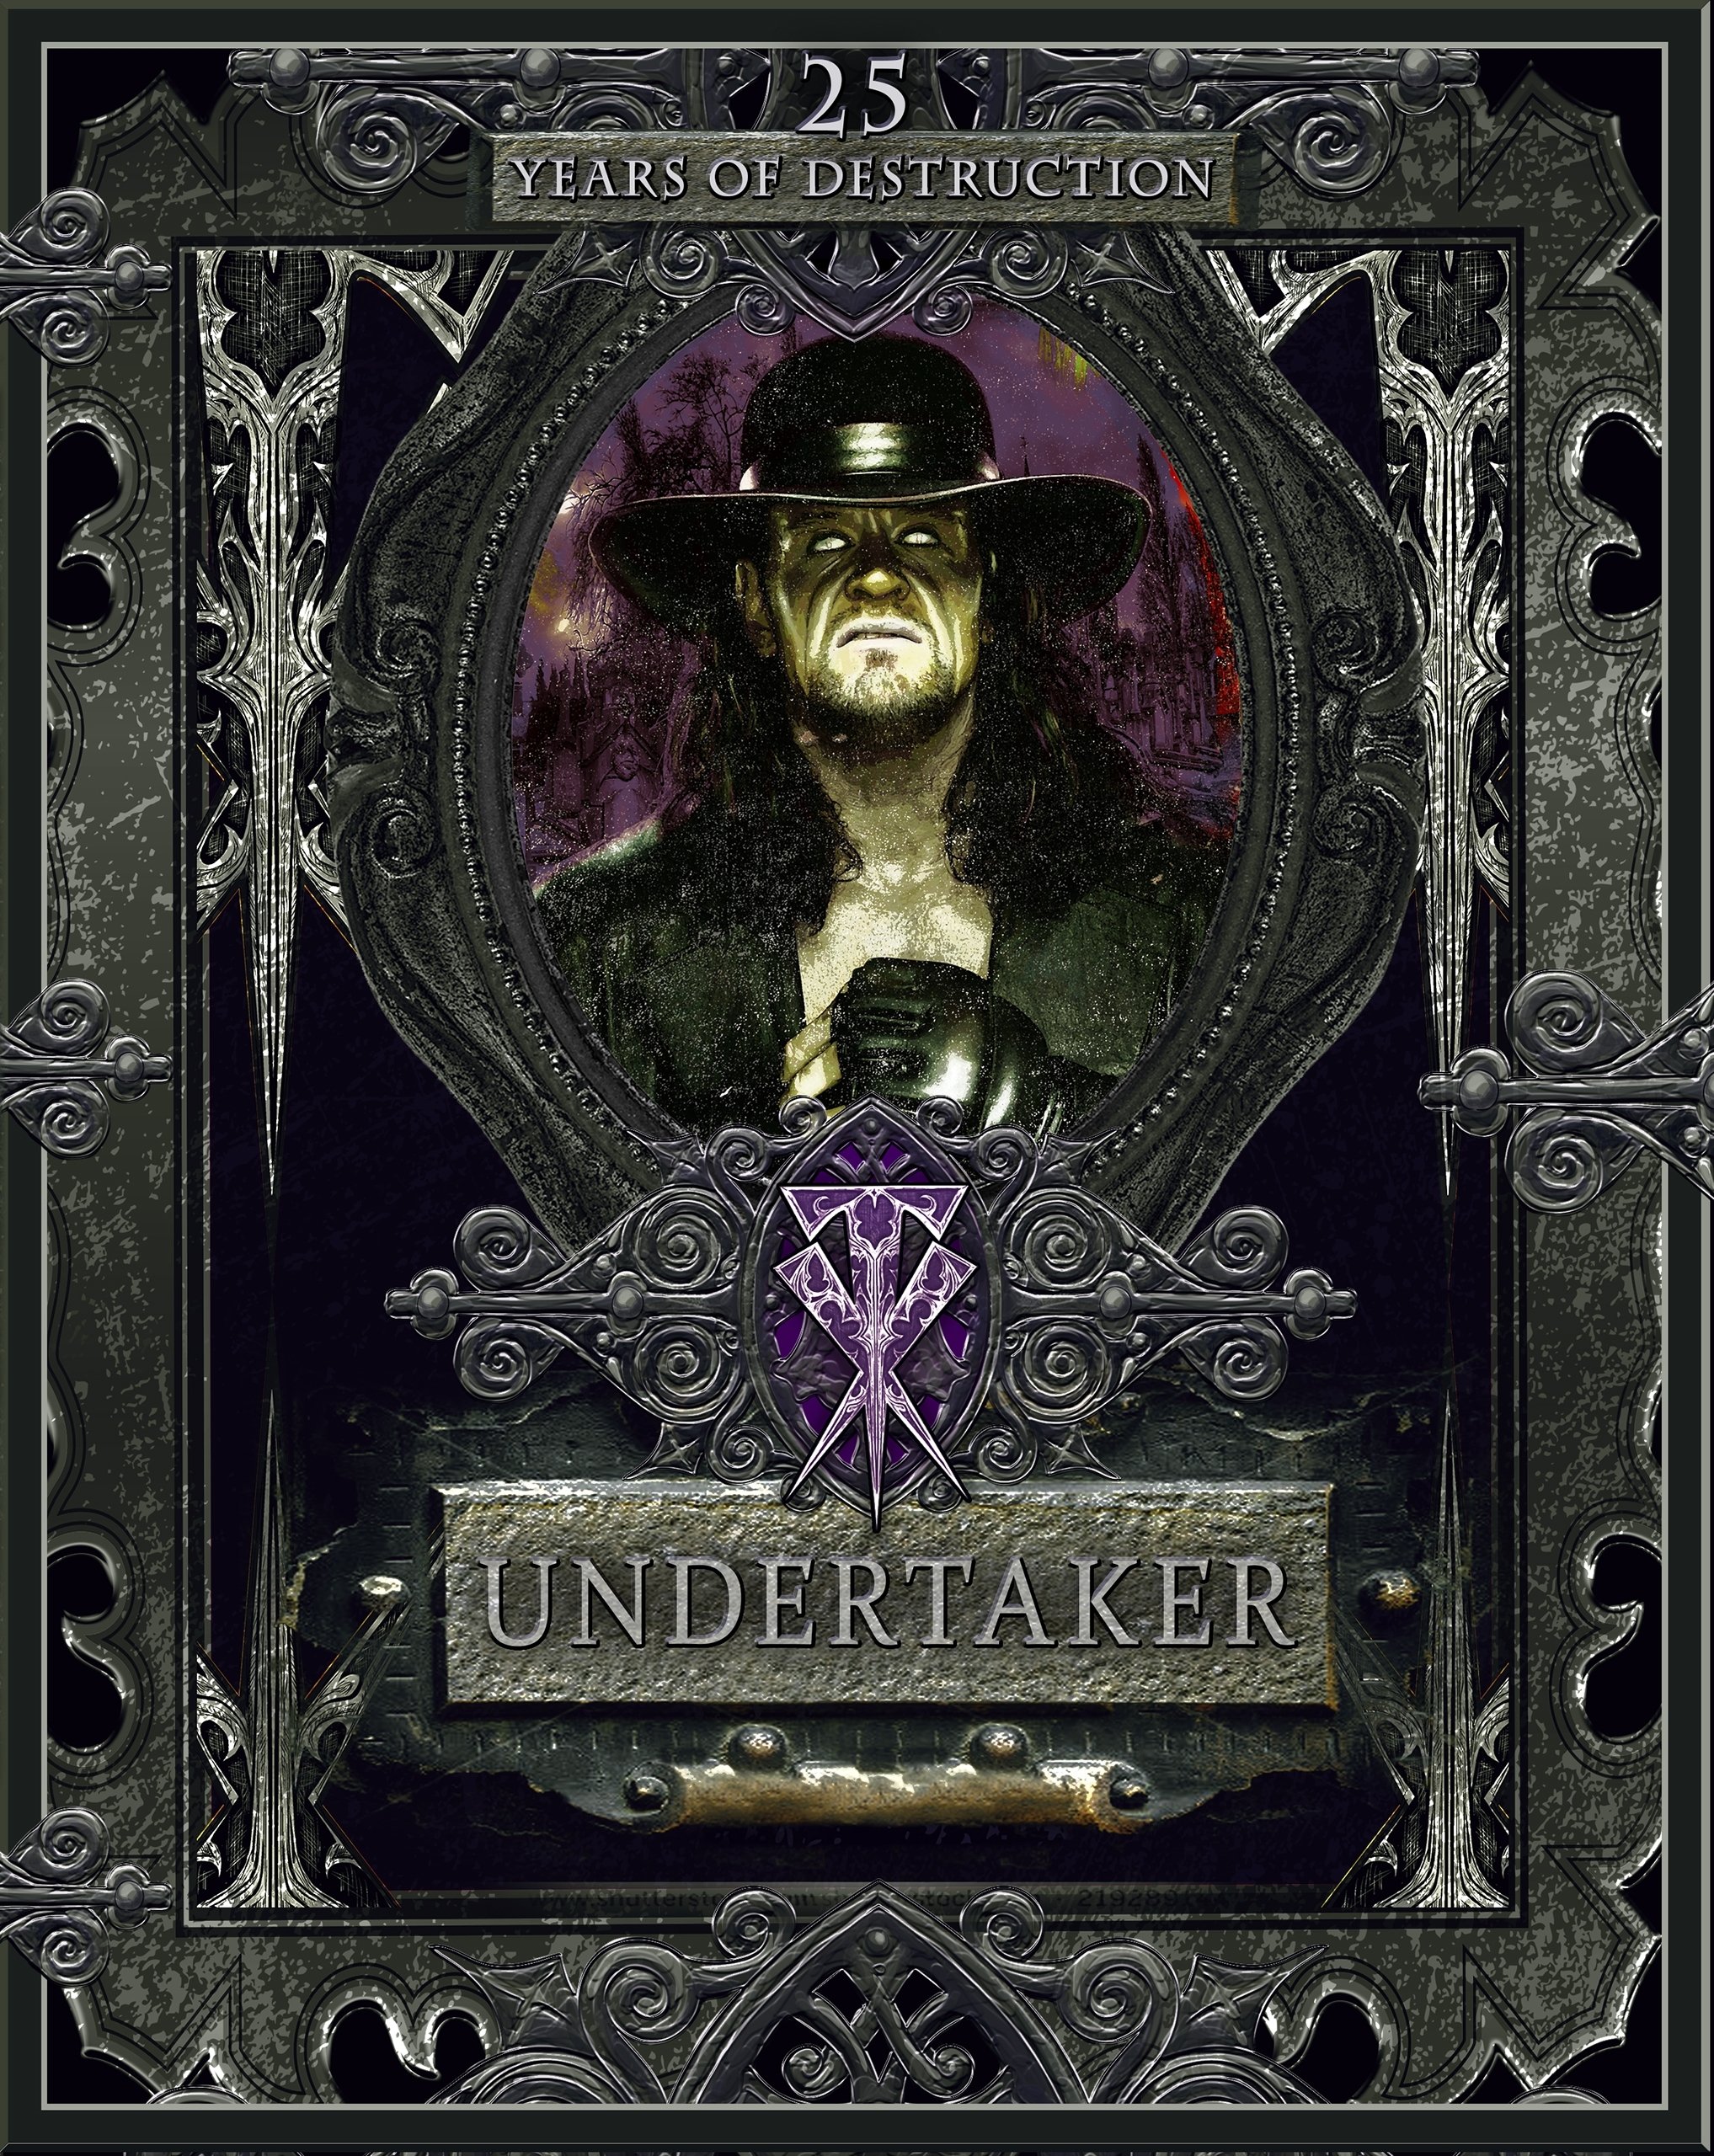 The Undertaker: 25 Years of Destruction book cover (Source: Amazon)